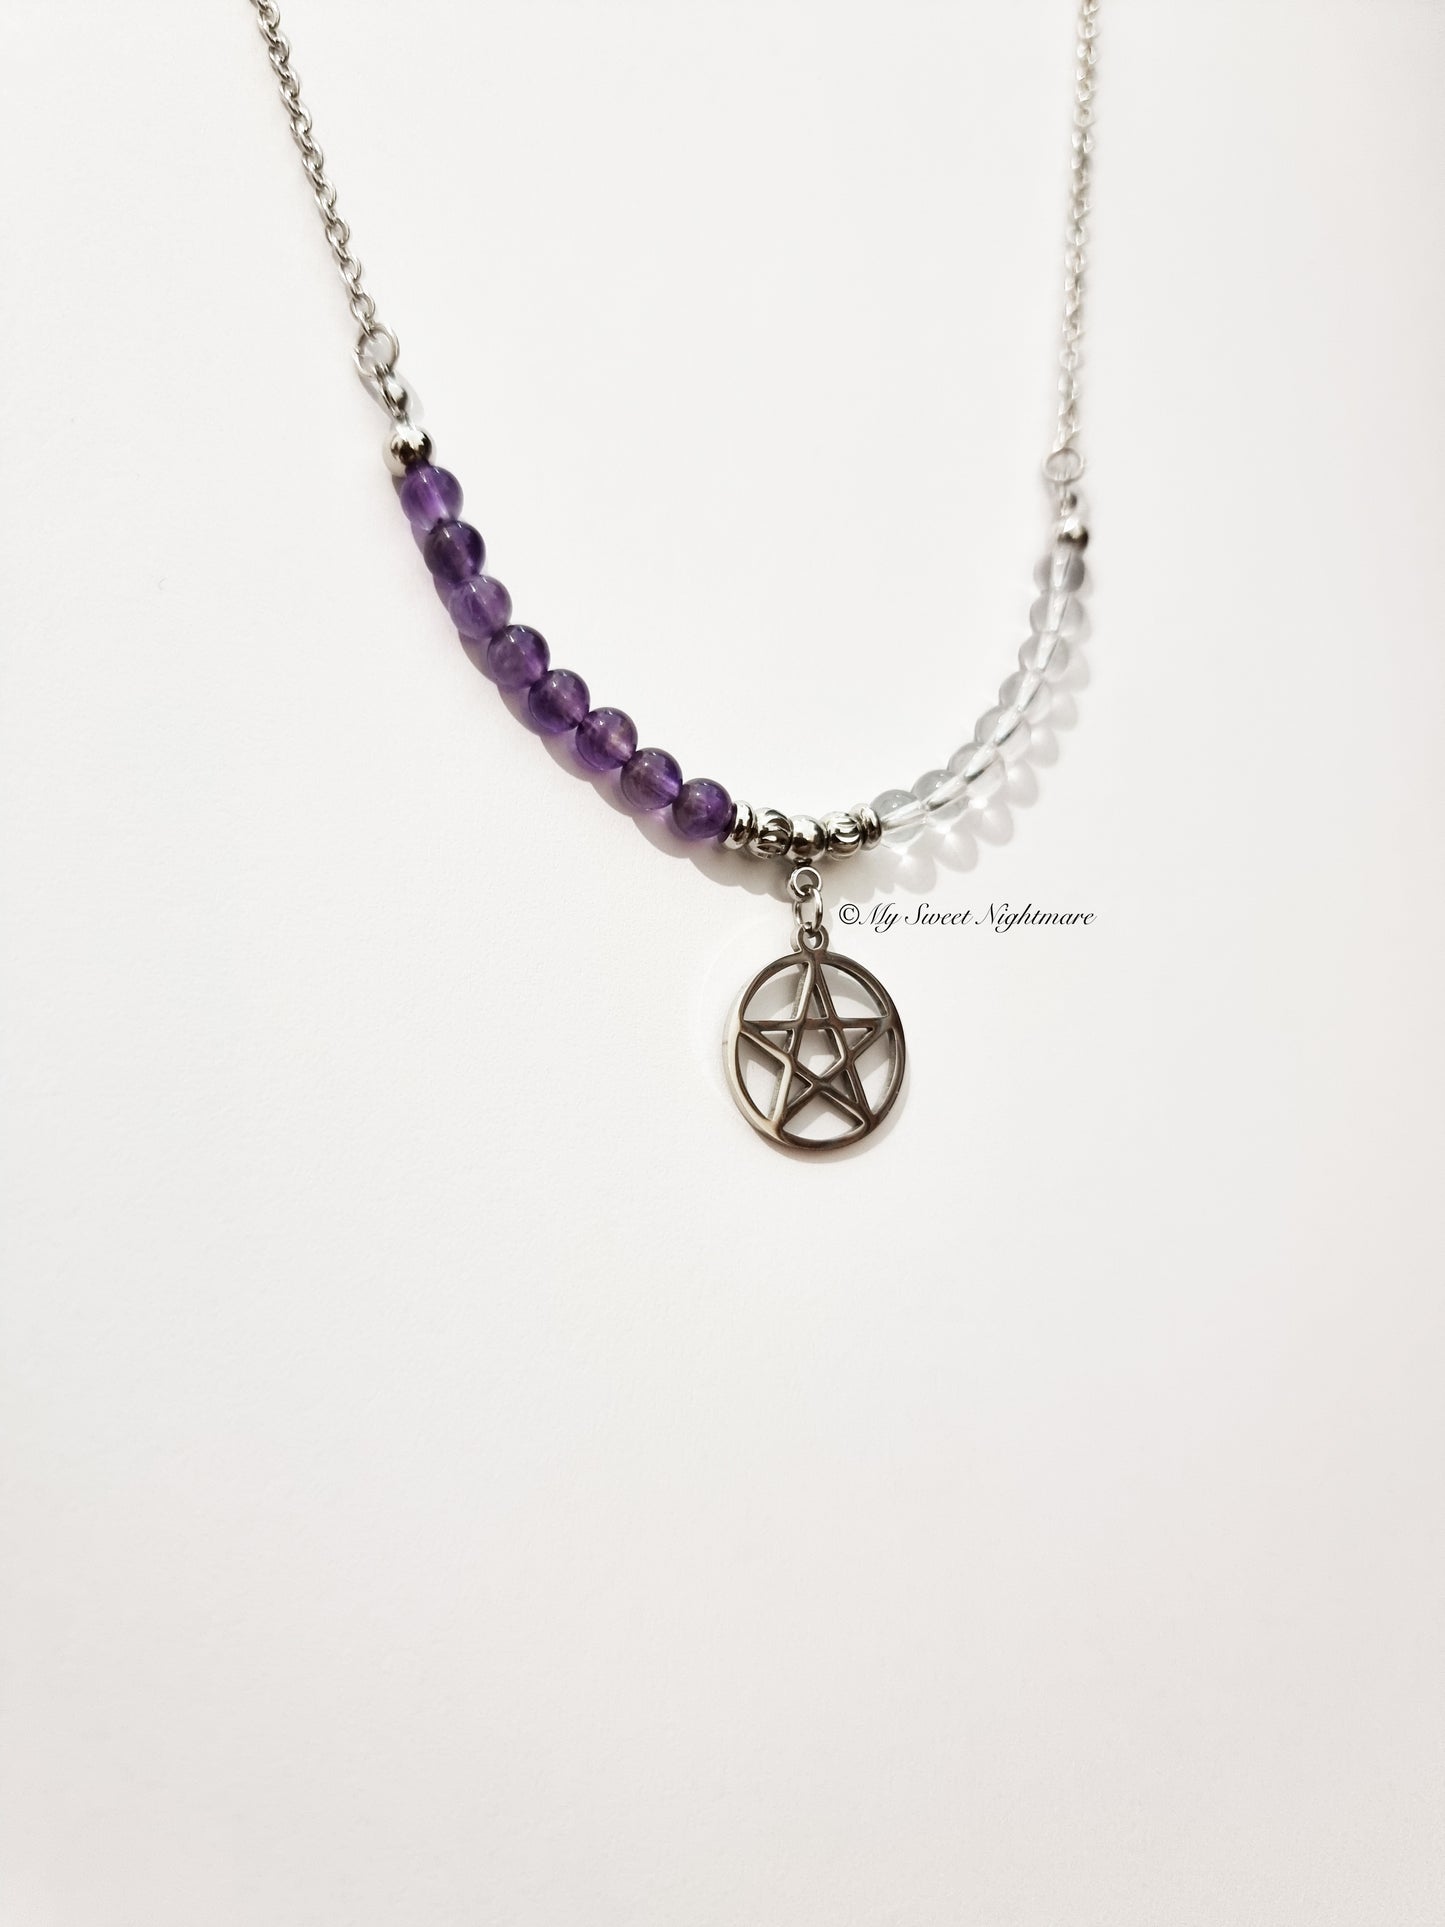 Necklace with pentagram, amethyst and rock crystal